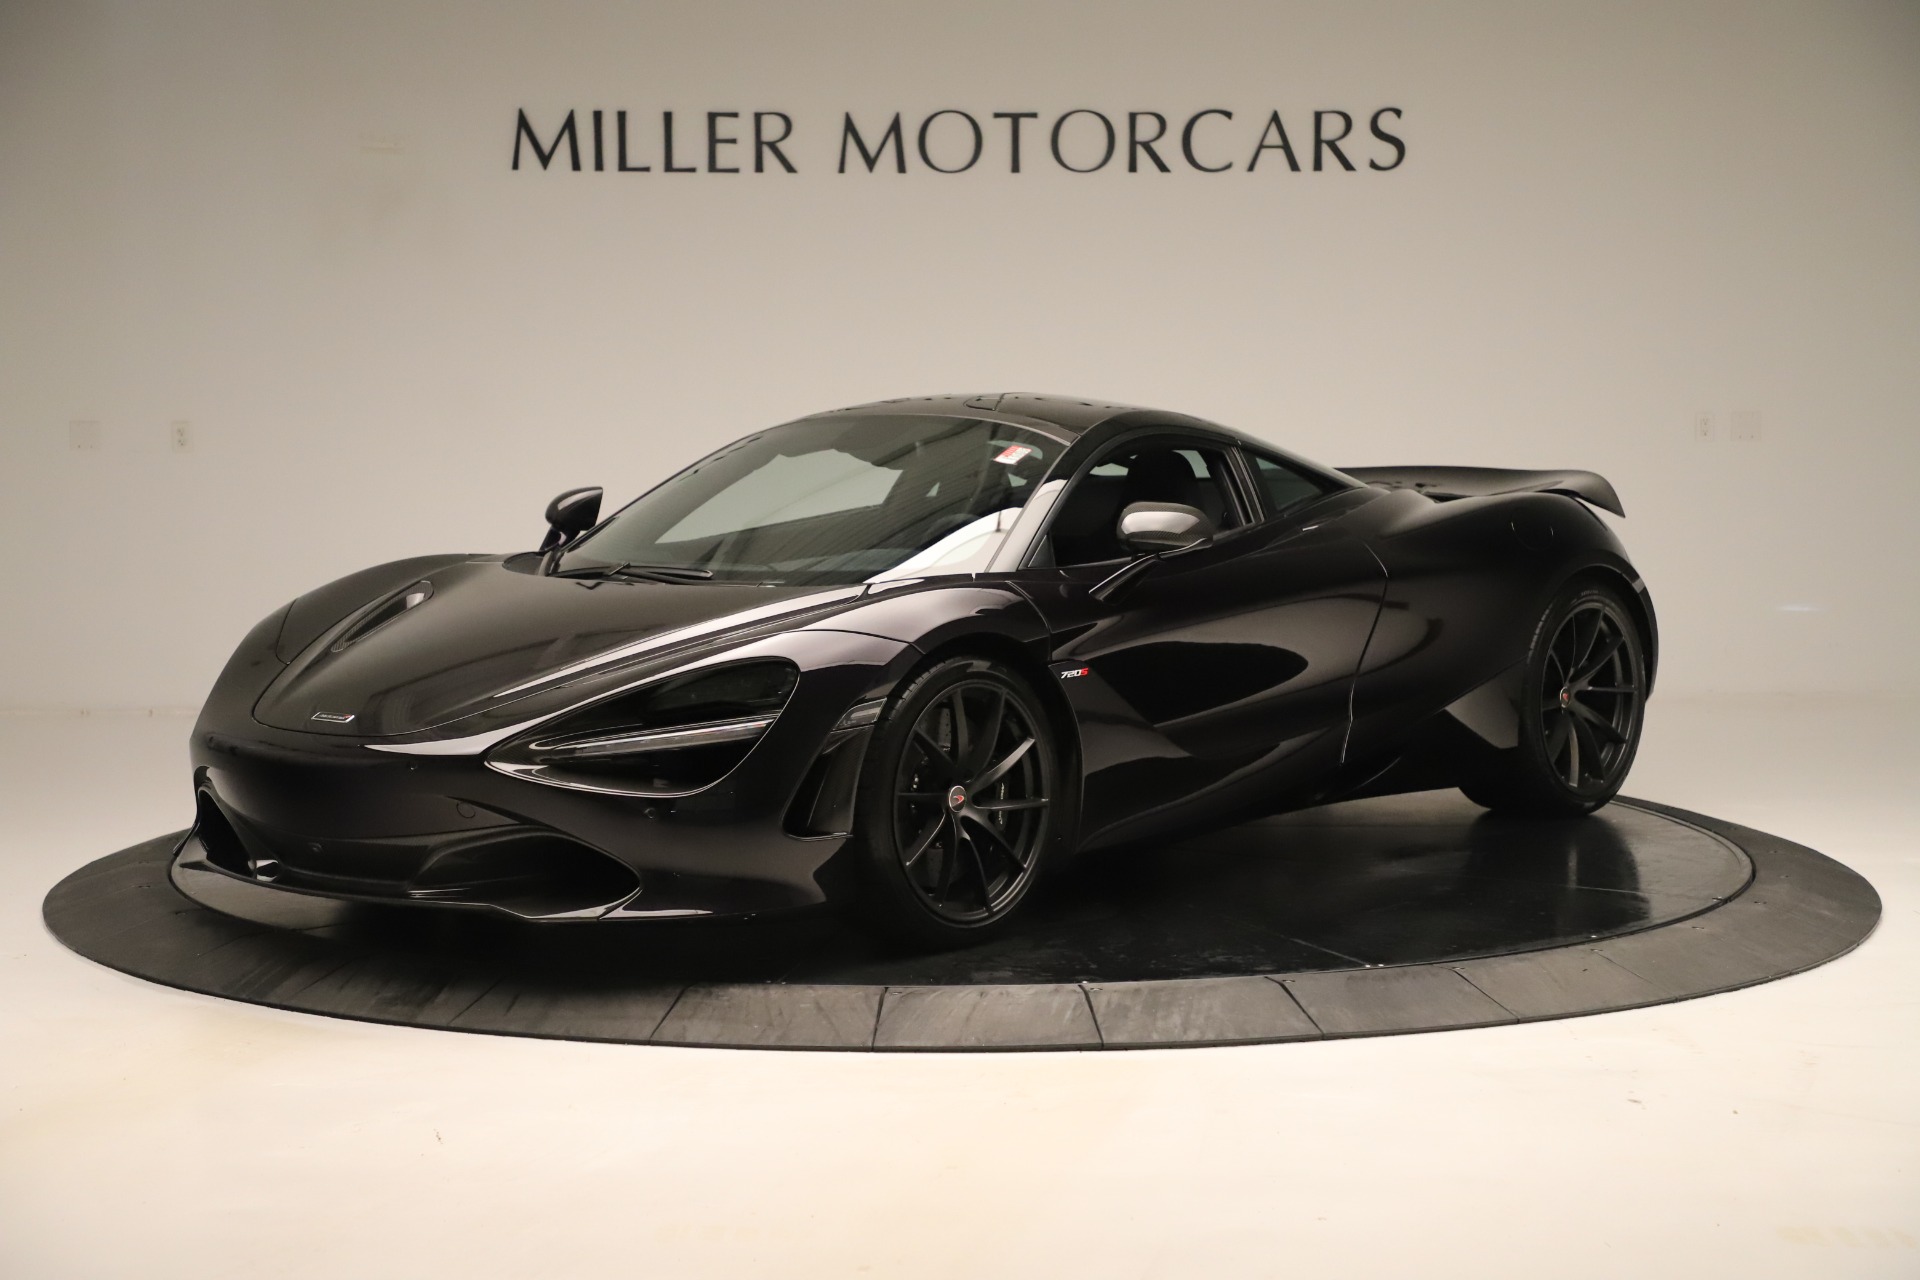 Used 2018 McLaren 720S Coupe for sale Sold at Bentley Greenwich in Greenwich CT 06830 1